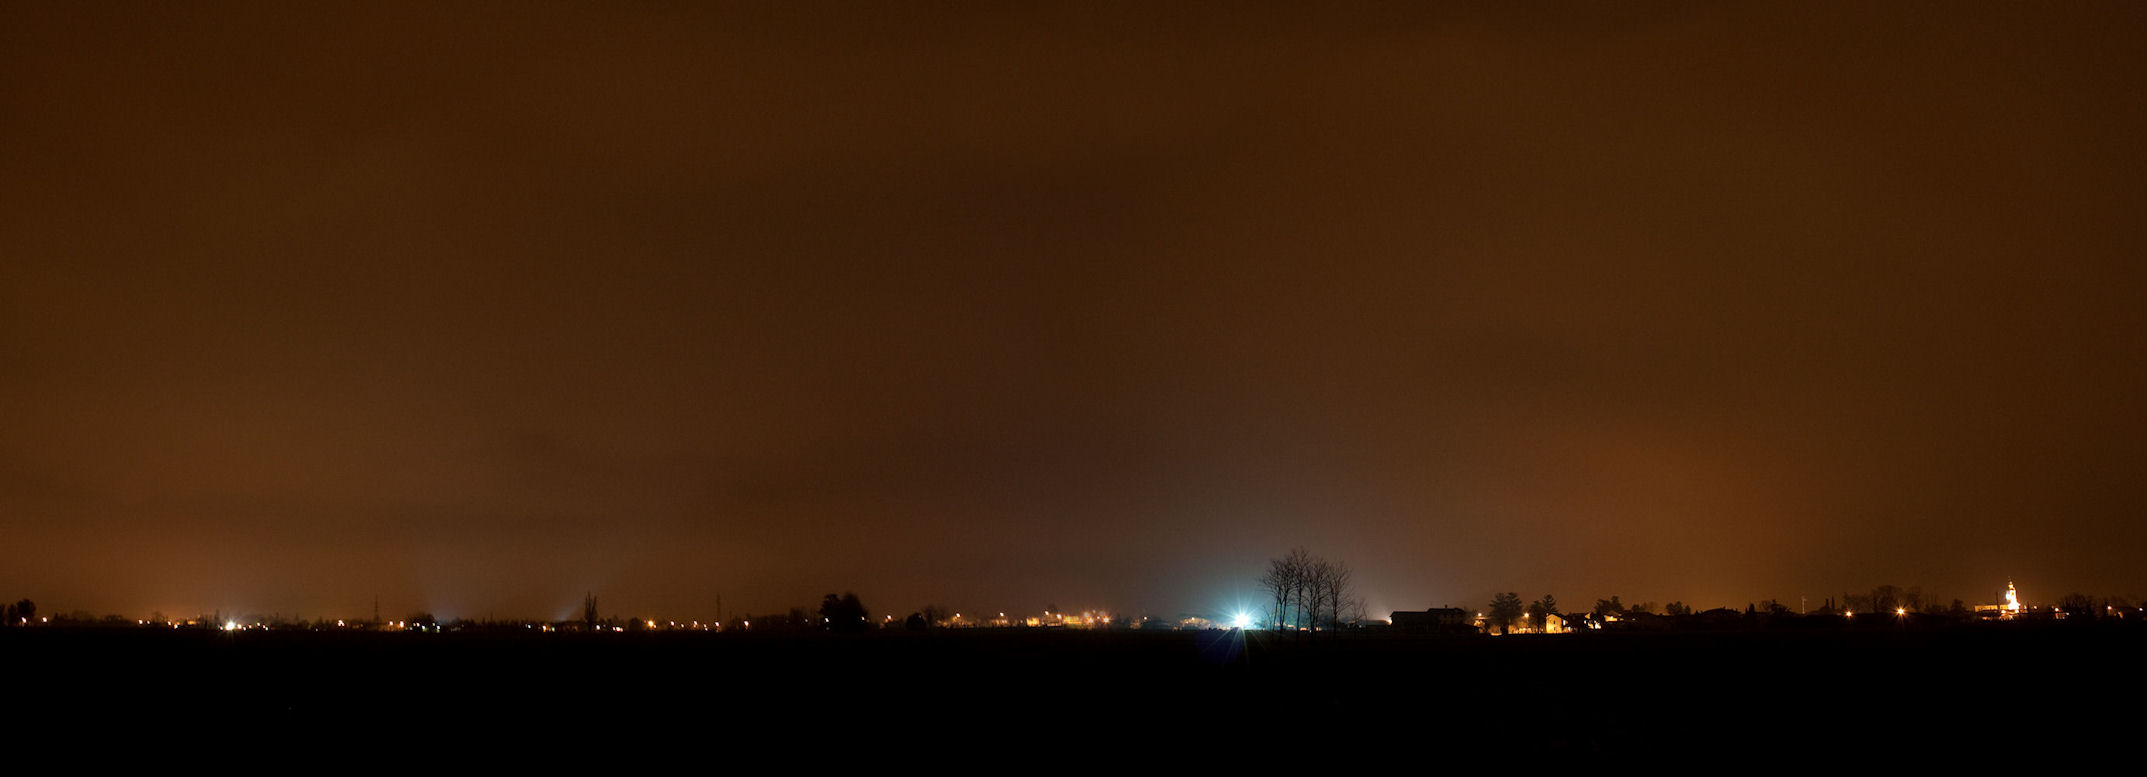 Light pollution in Clauiano: 100 KB; click on the image to enlarge